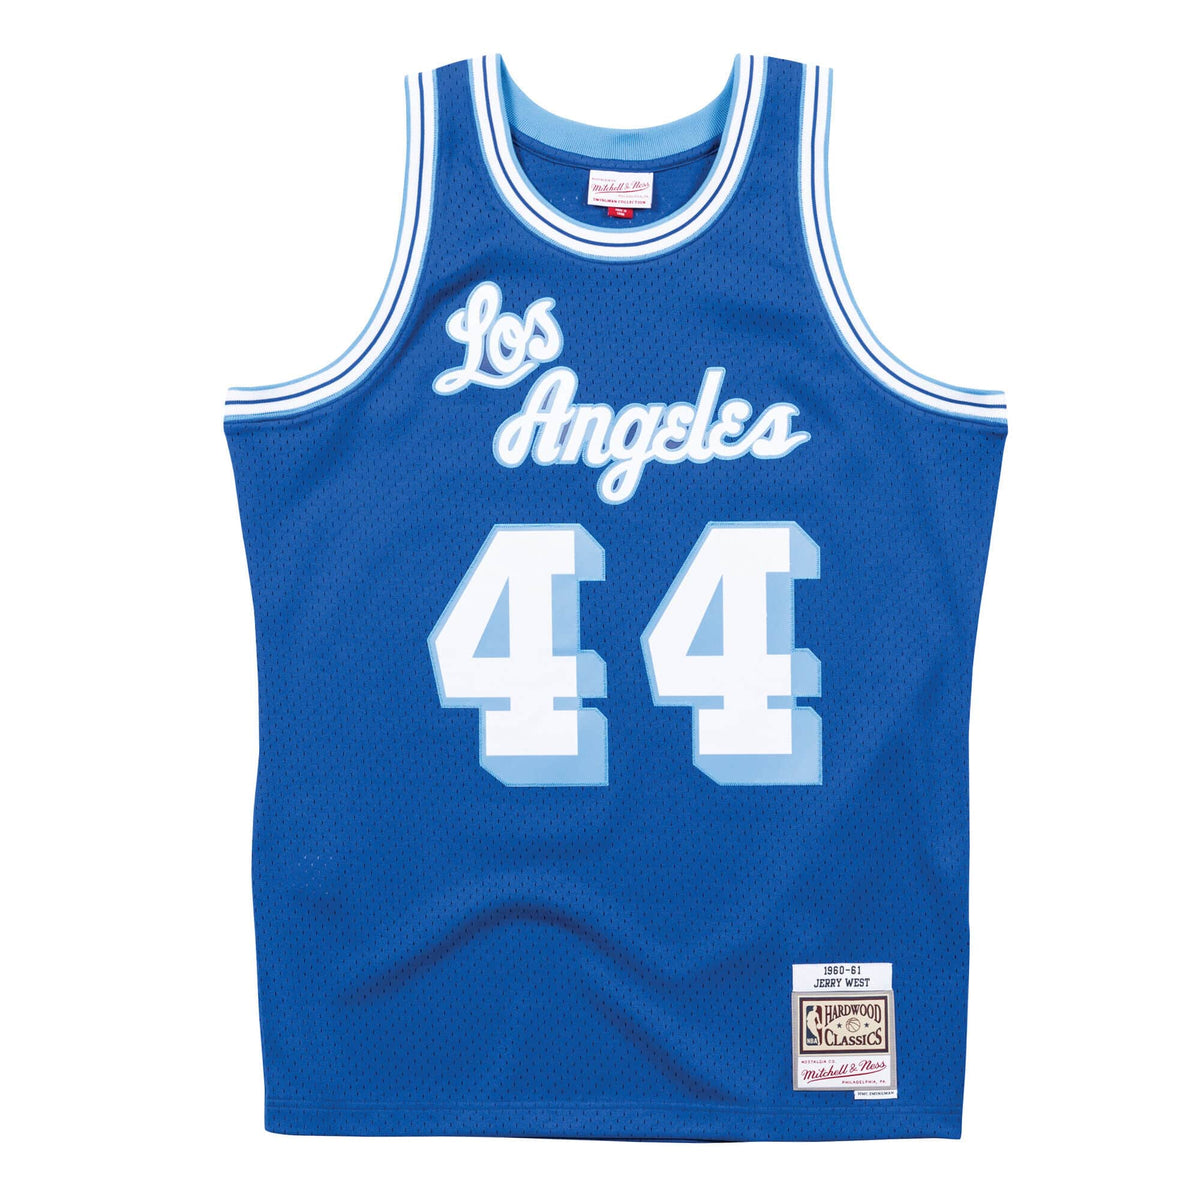 NBA Hardwood Classic Lakers Jerry West Jersey